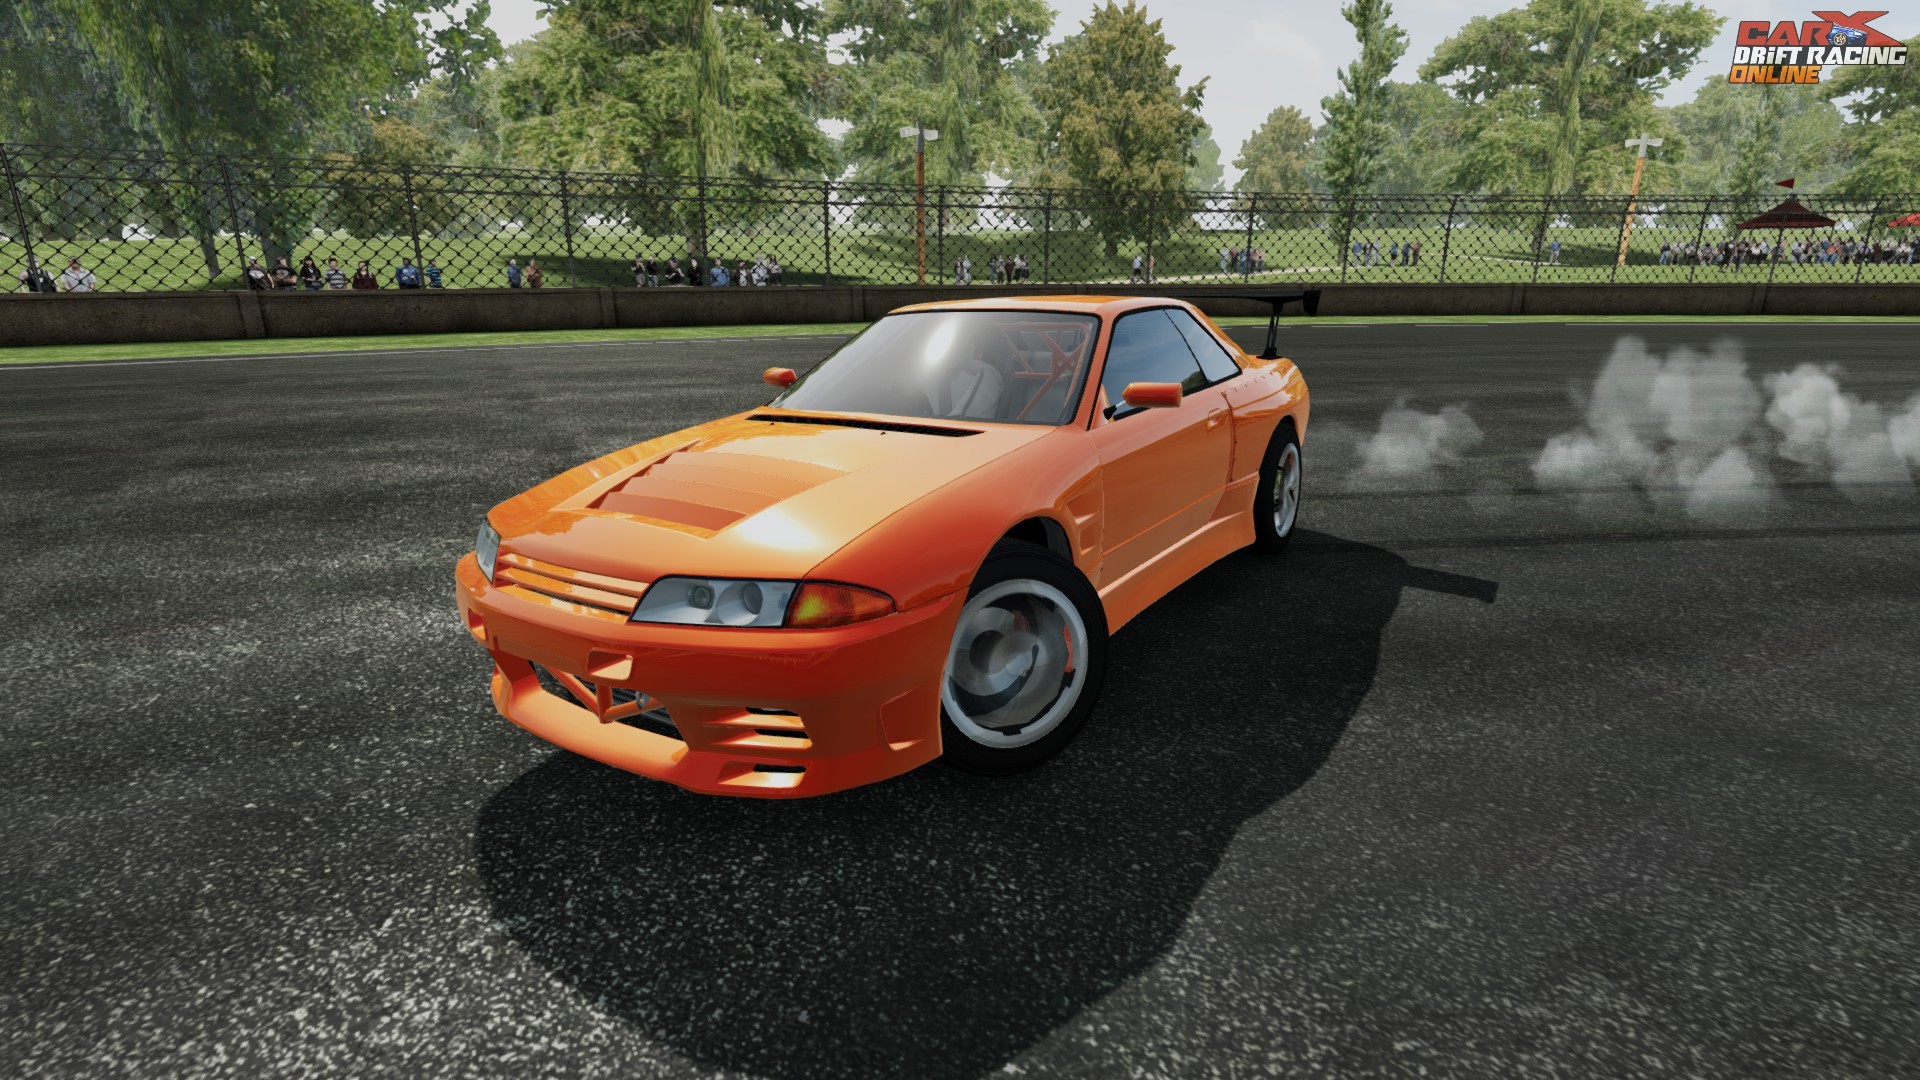 CarX Drift Racing Online: What is the PTR Update and when will it